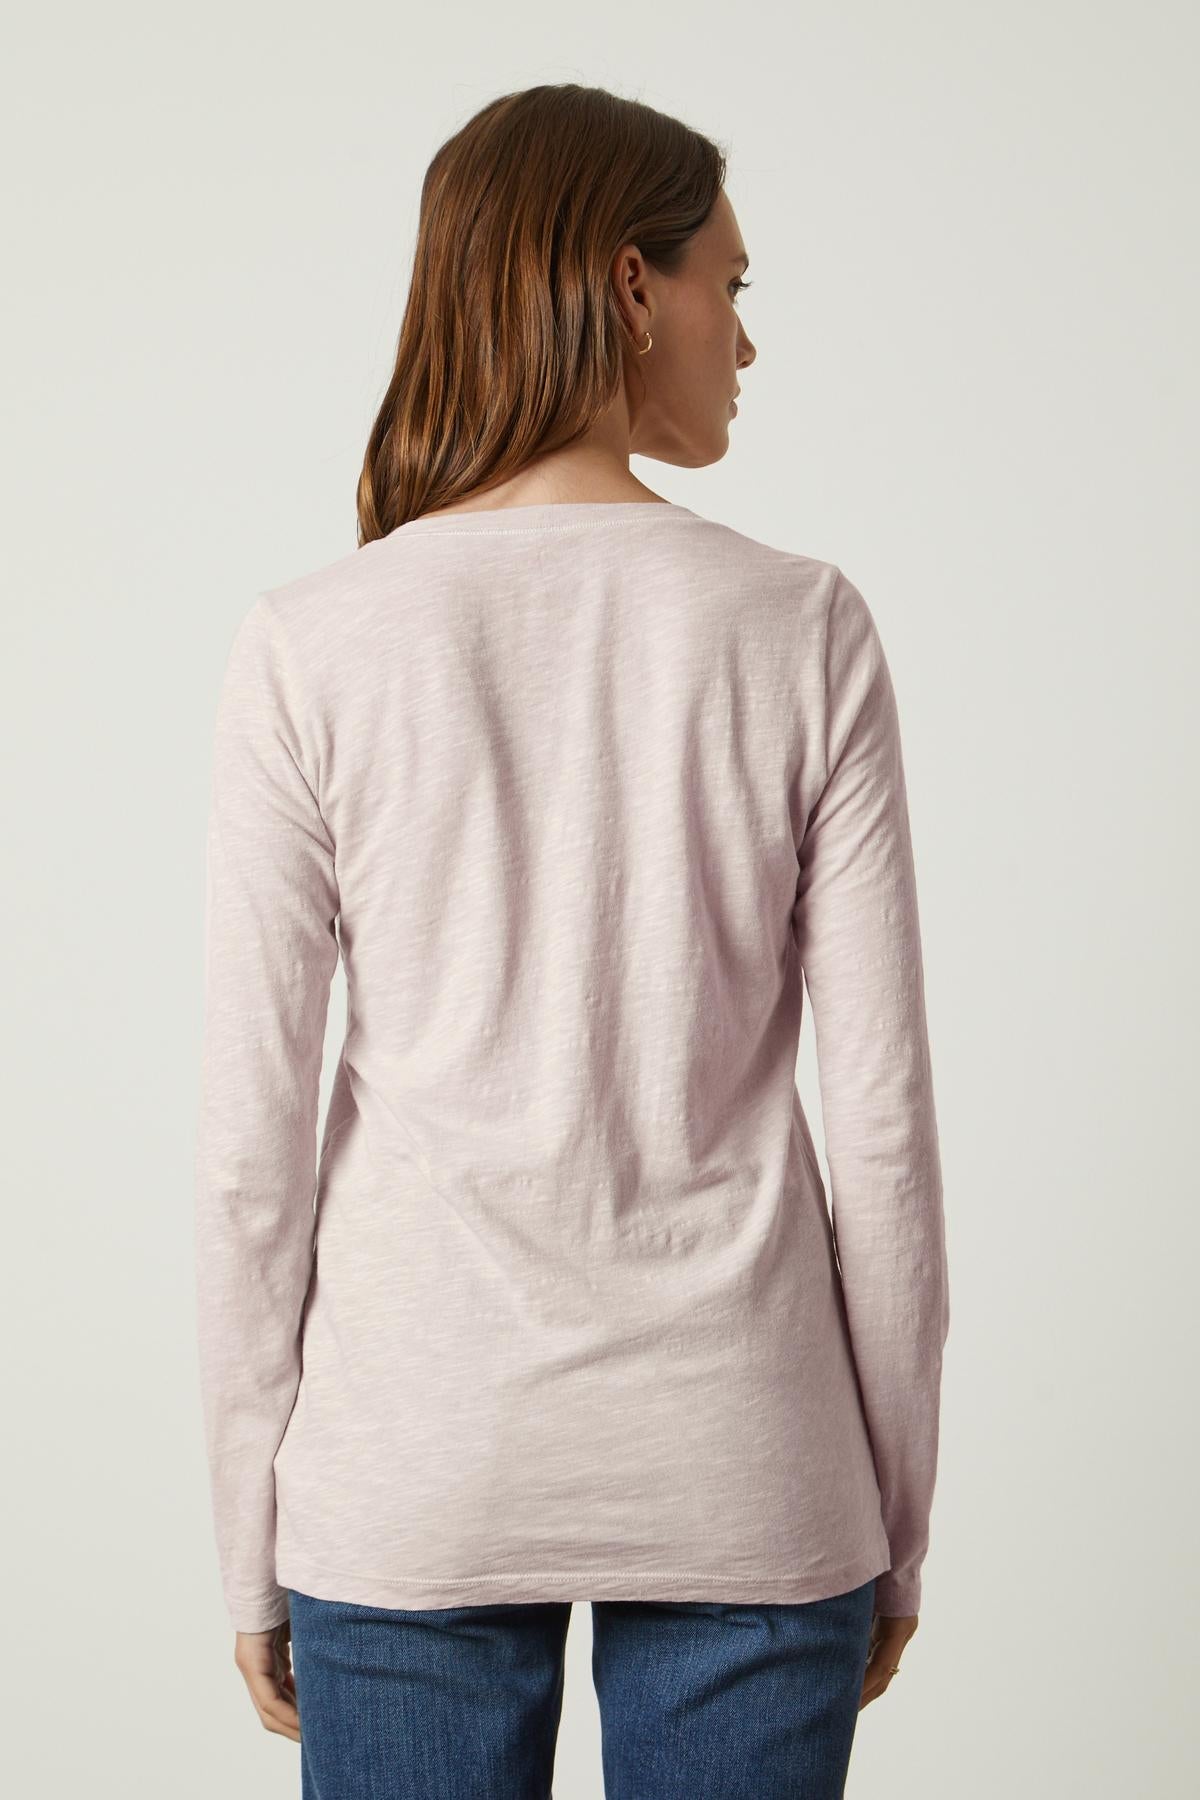 The back view of a woman wearing a long-sleeved pink BLAIRE ORIGINAL SLUB TEE made by Velvet by Graham & Spencer.-36118387163329